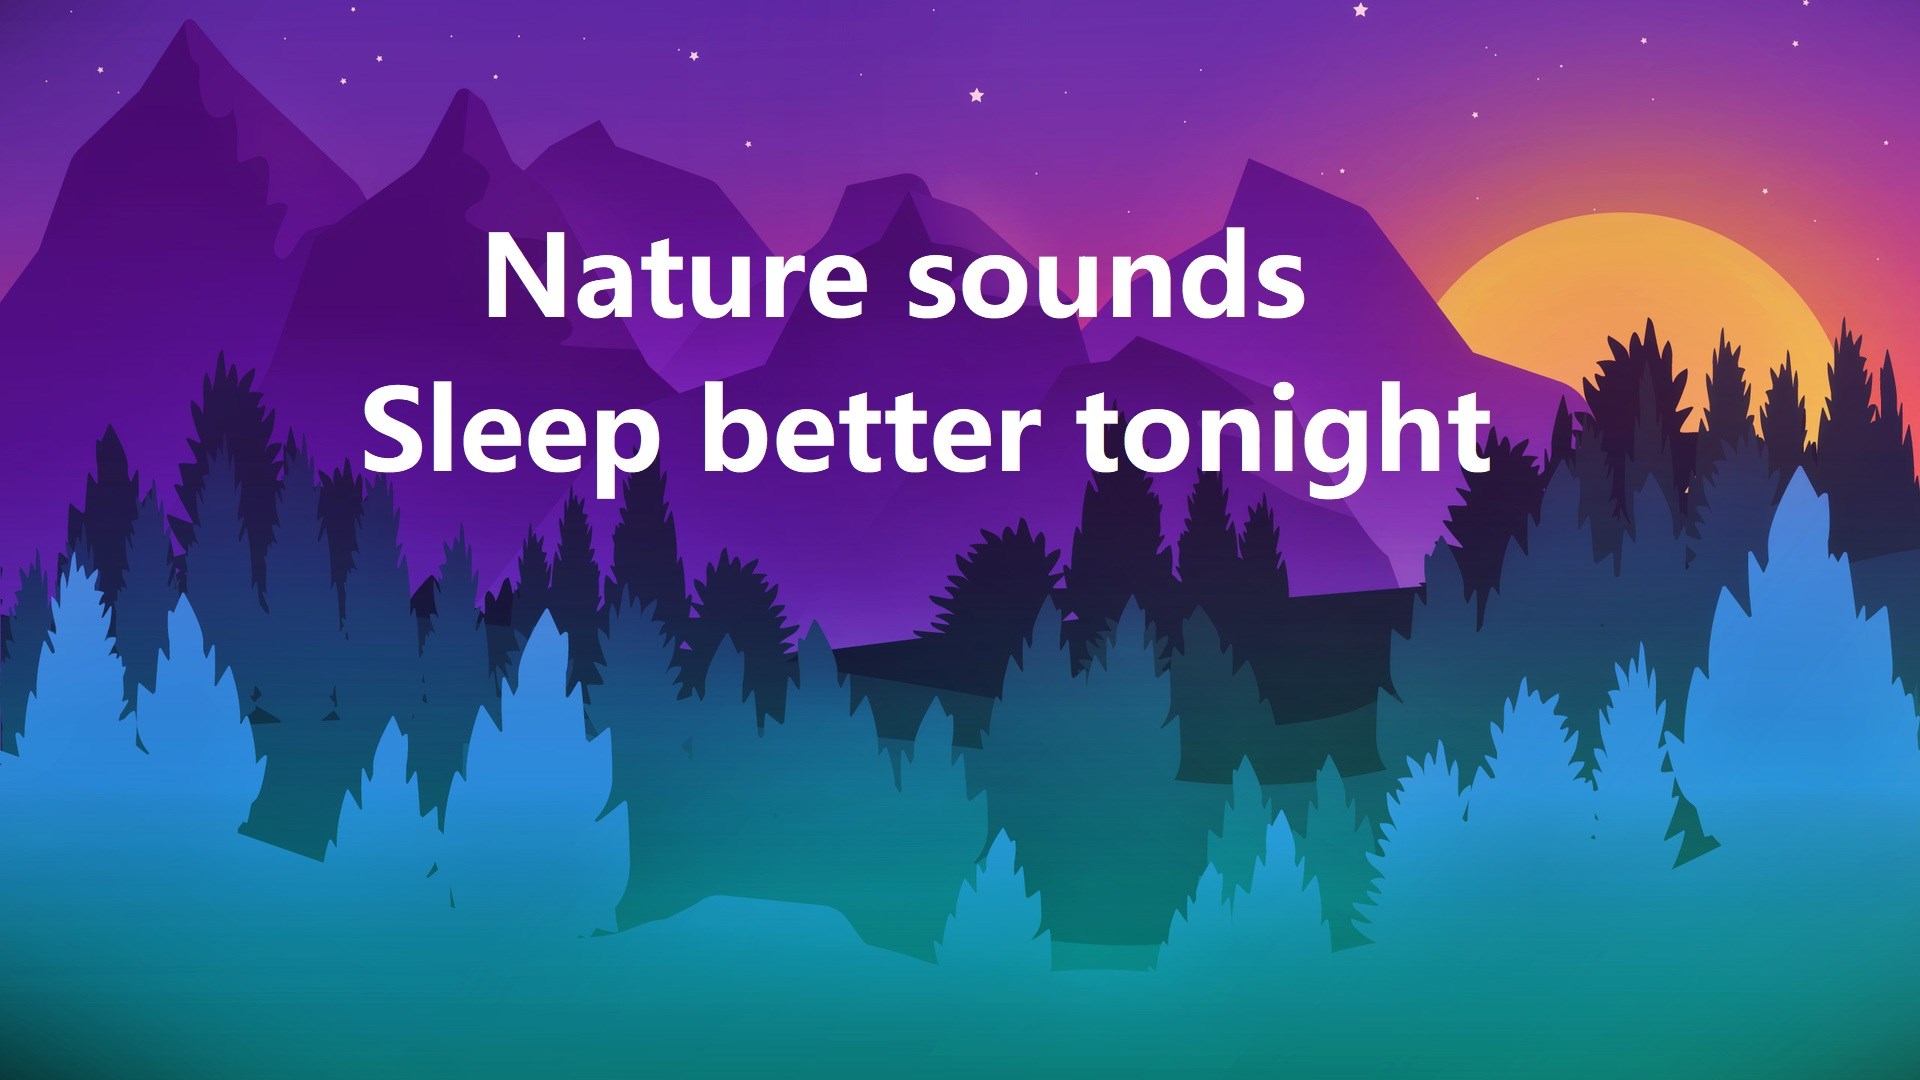 Relaxing Sounds of Nature Mp3 Download - Music2relax.com